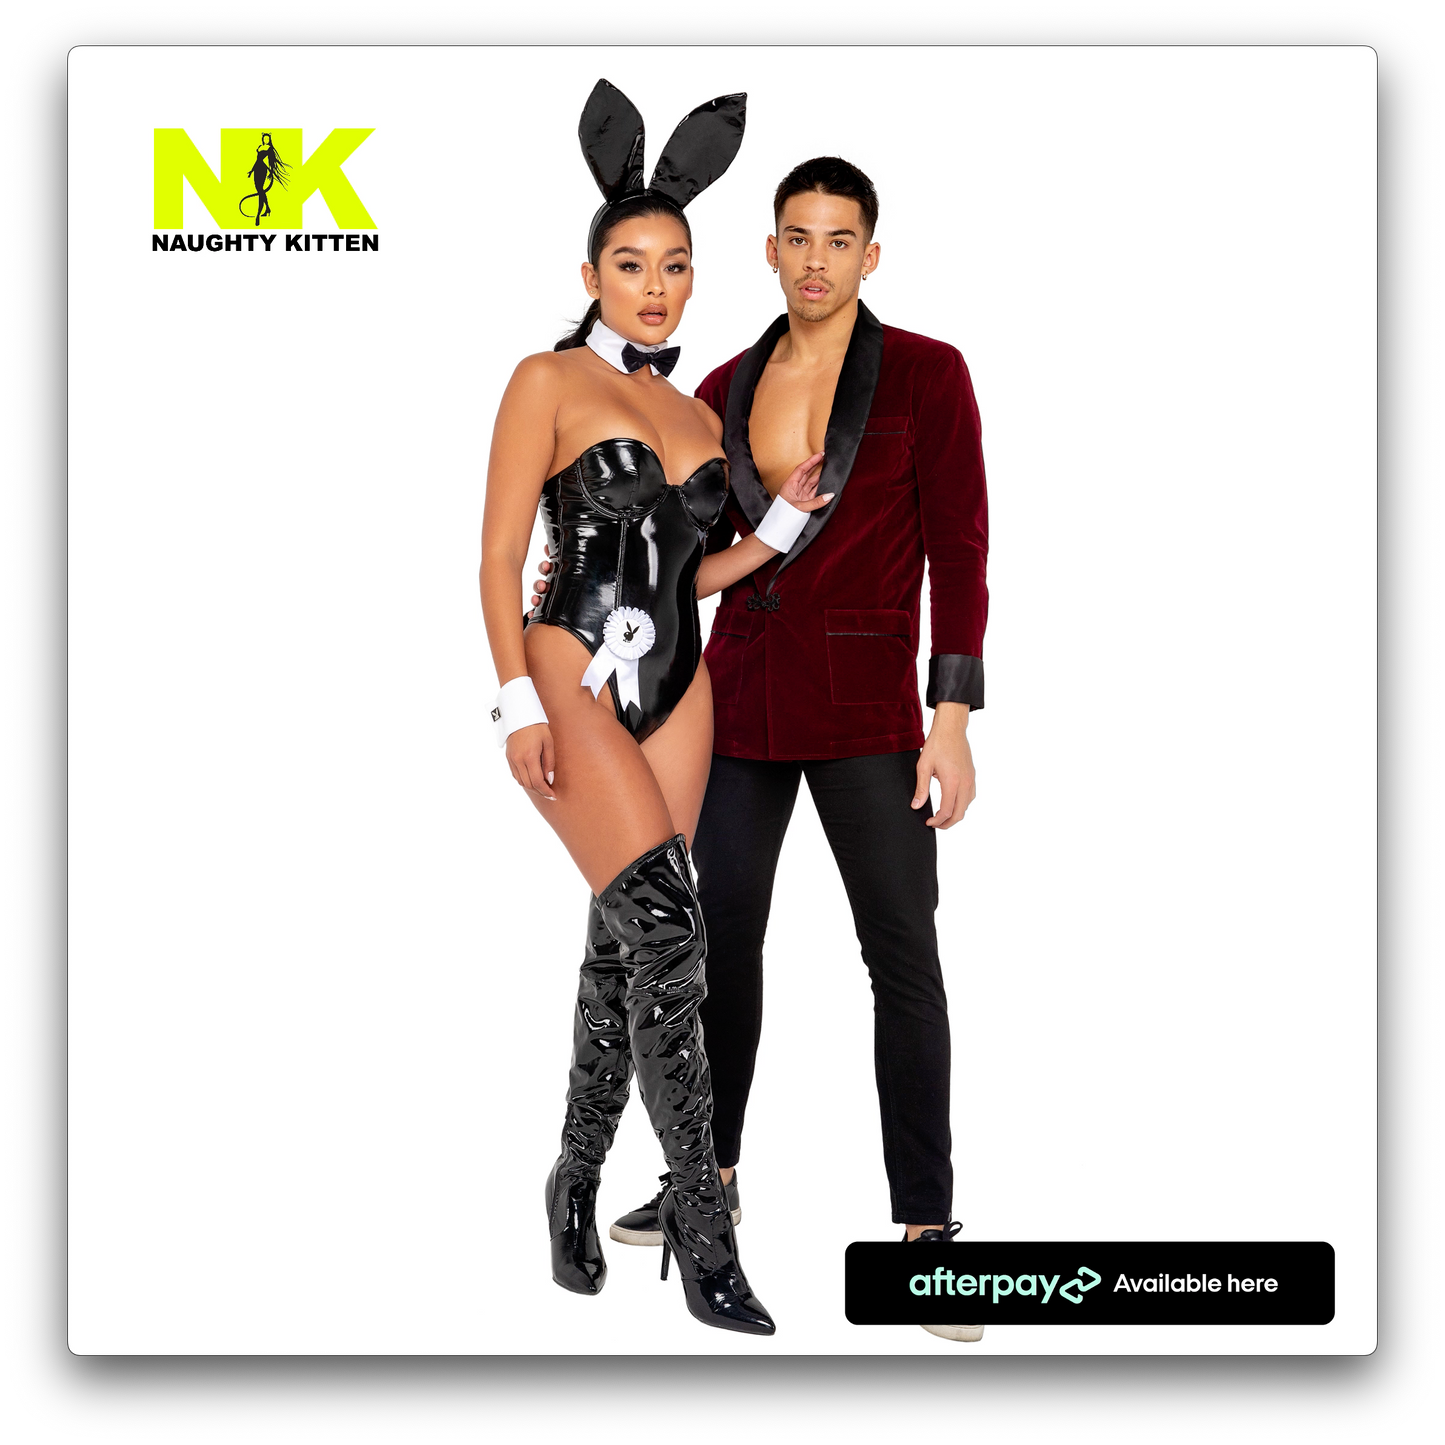 Naughty Kitten Clothing Playboy Seductress Bunny Costume Front View Playboy Costume Couple Costume